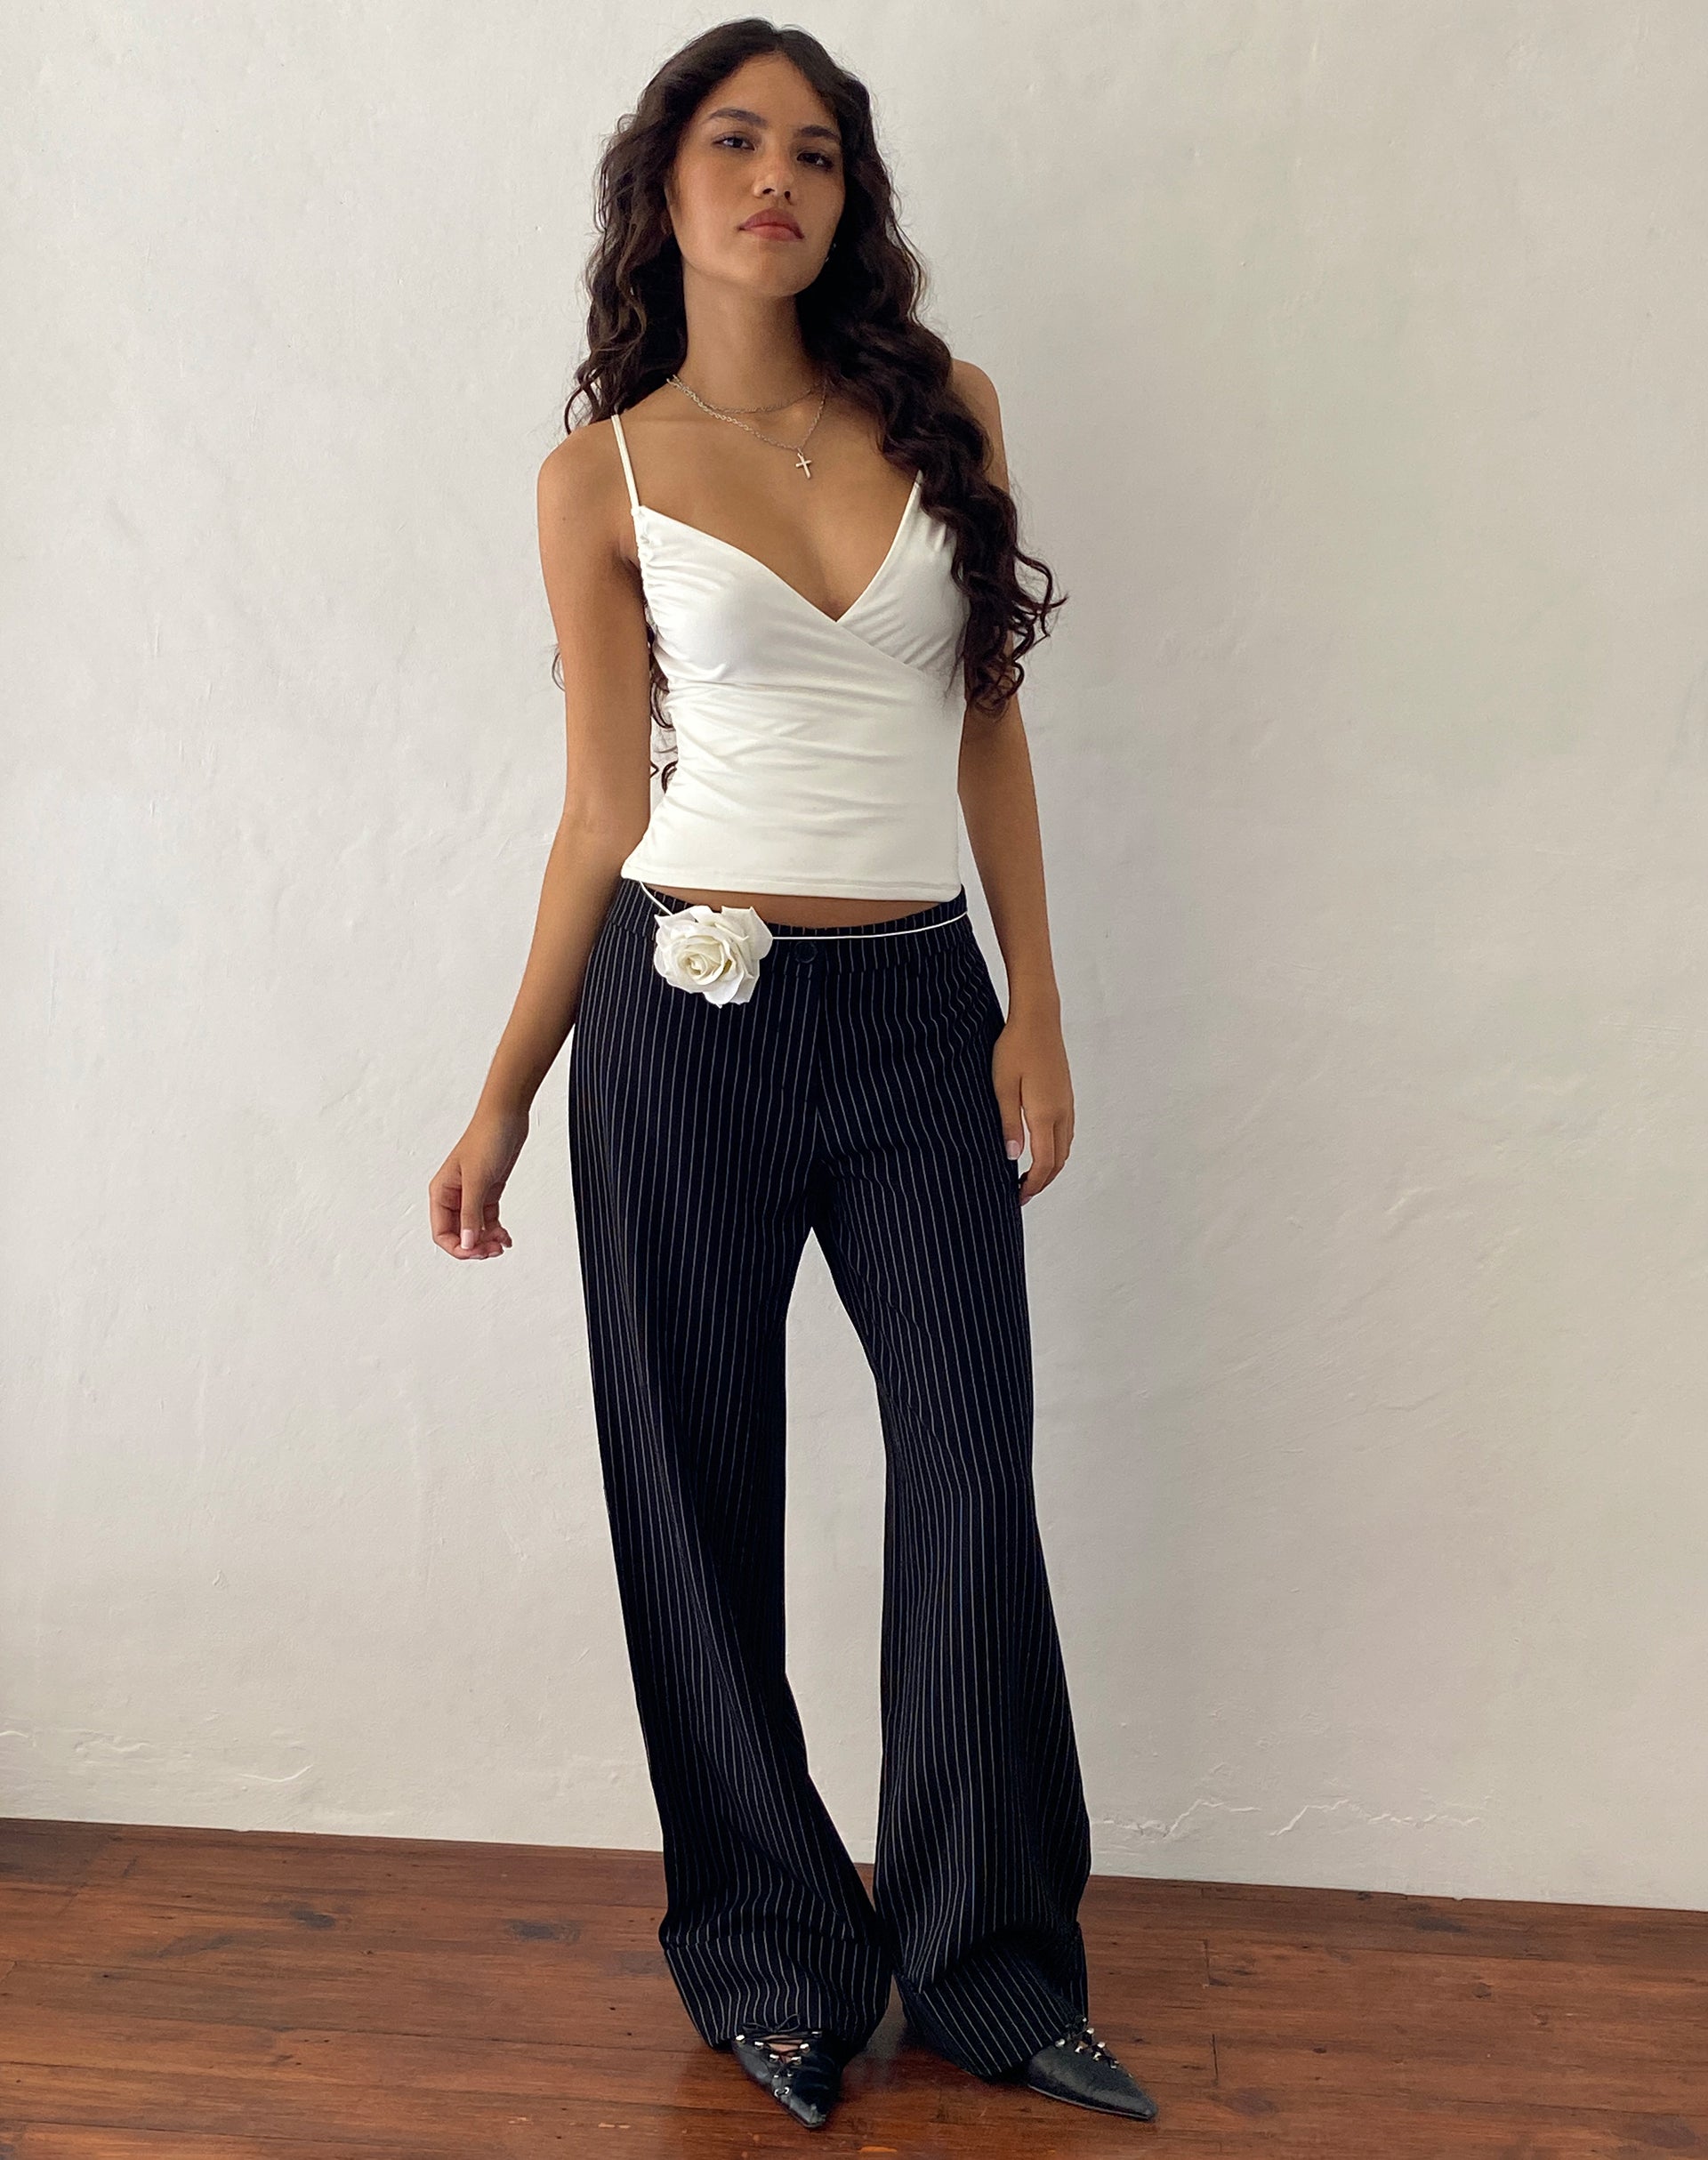 Black Low Waist Trousers With Diamante Detail | Jaded London